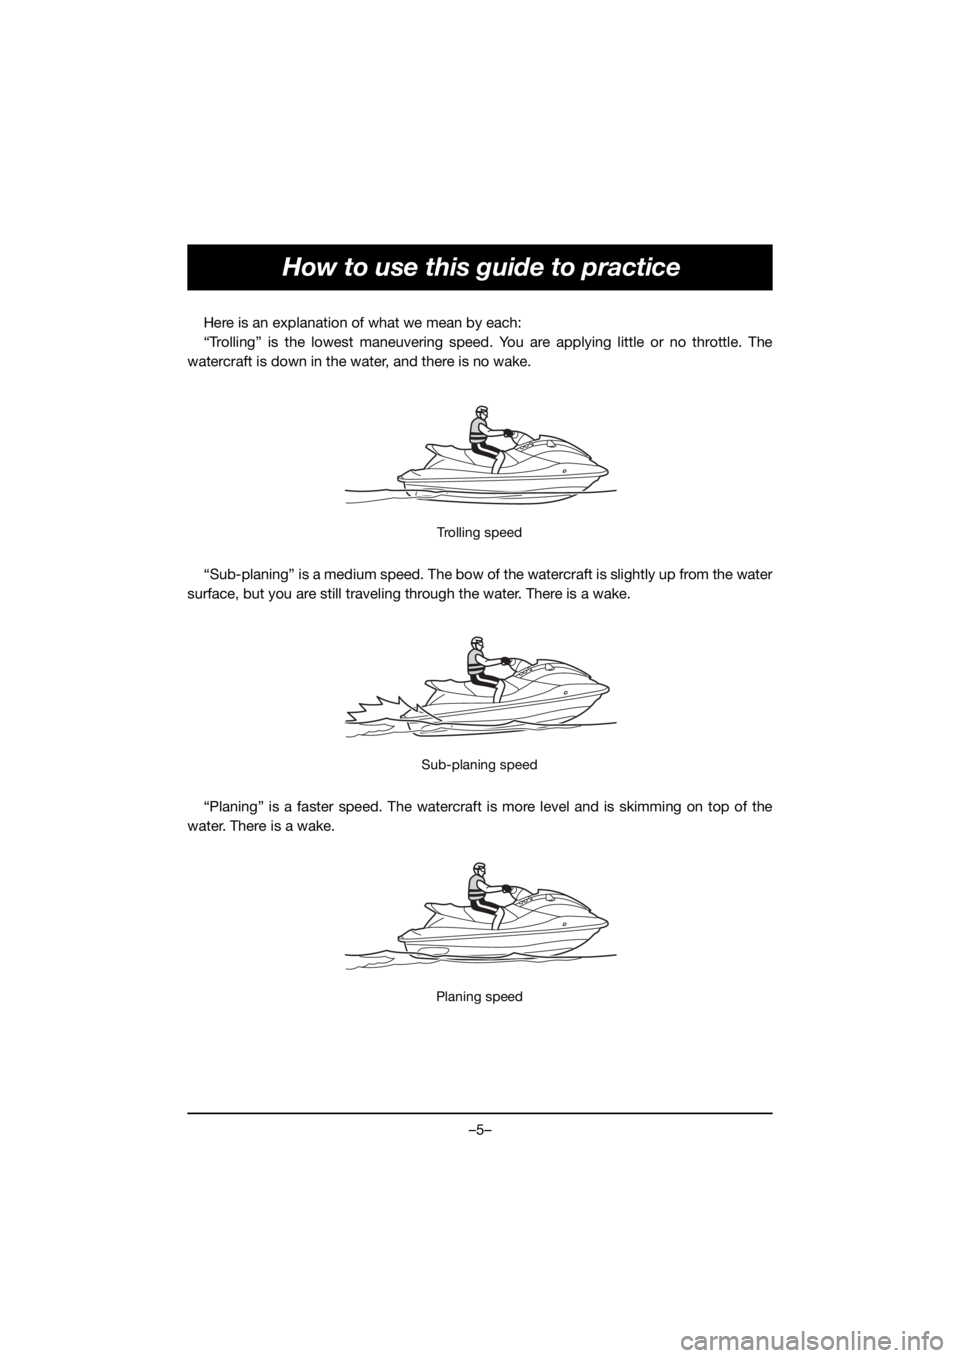 YAMAHA VX CRUISER HO 2020  Manual de utilização (in Portuguese) –5–
How to use this guide to practice
Here is an explanation of what we mean by each:
“Trolling” is the lowest maneuvering speed. You are applying little or no throttle. The
watercraft is down